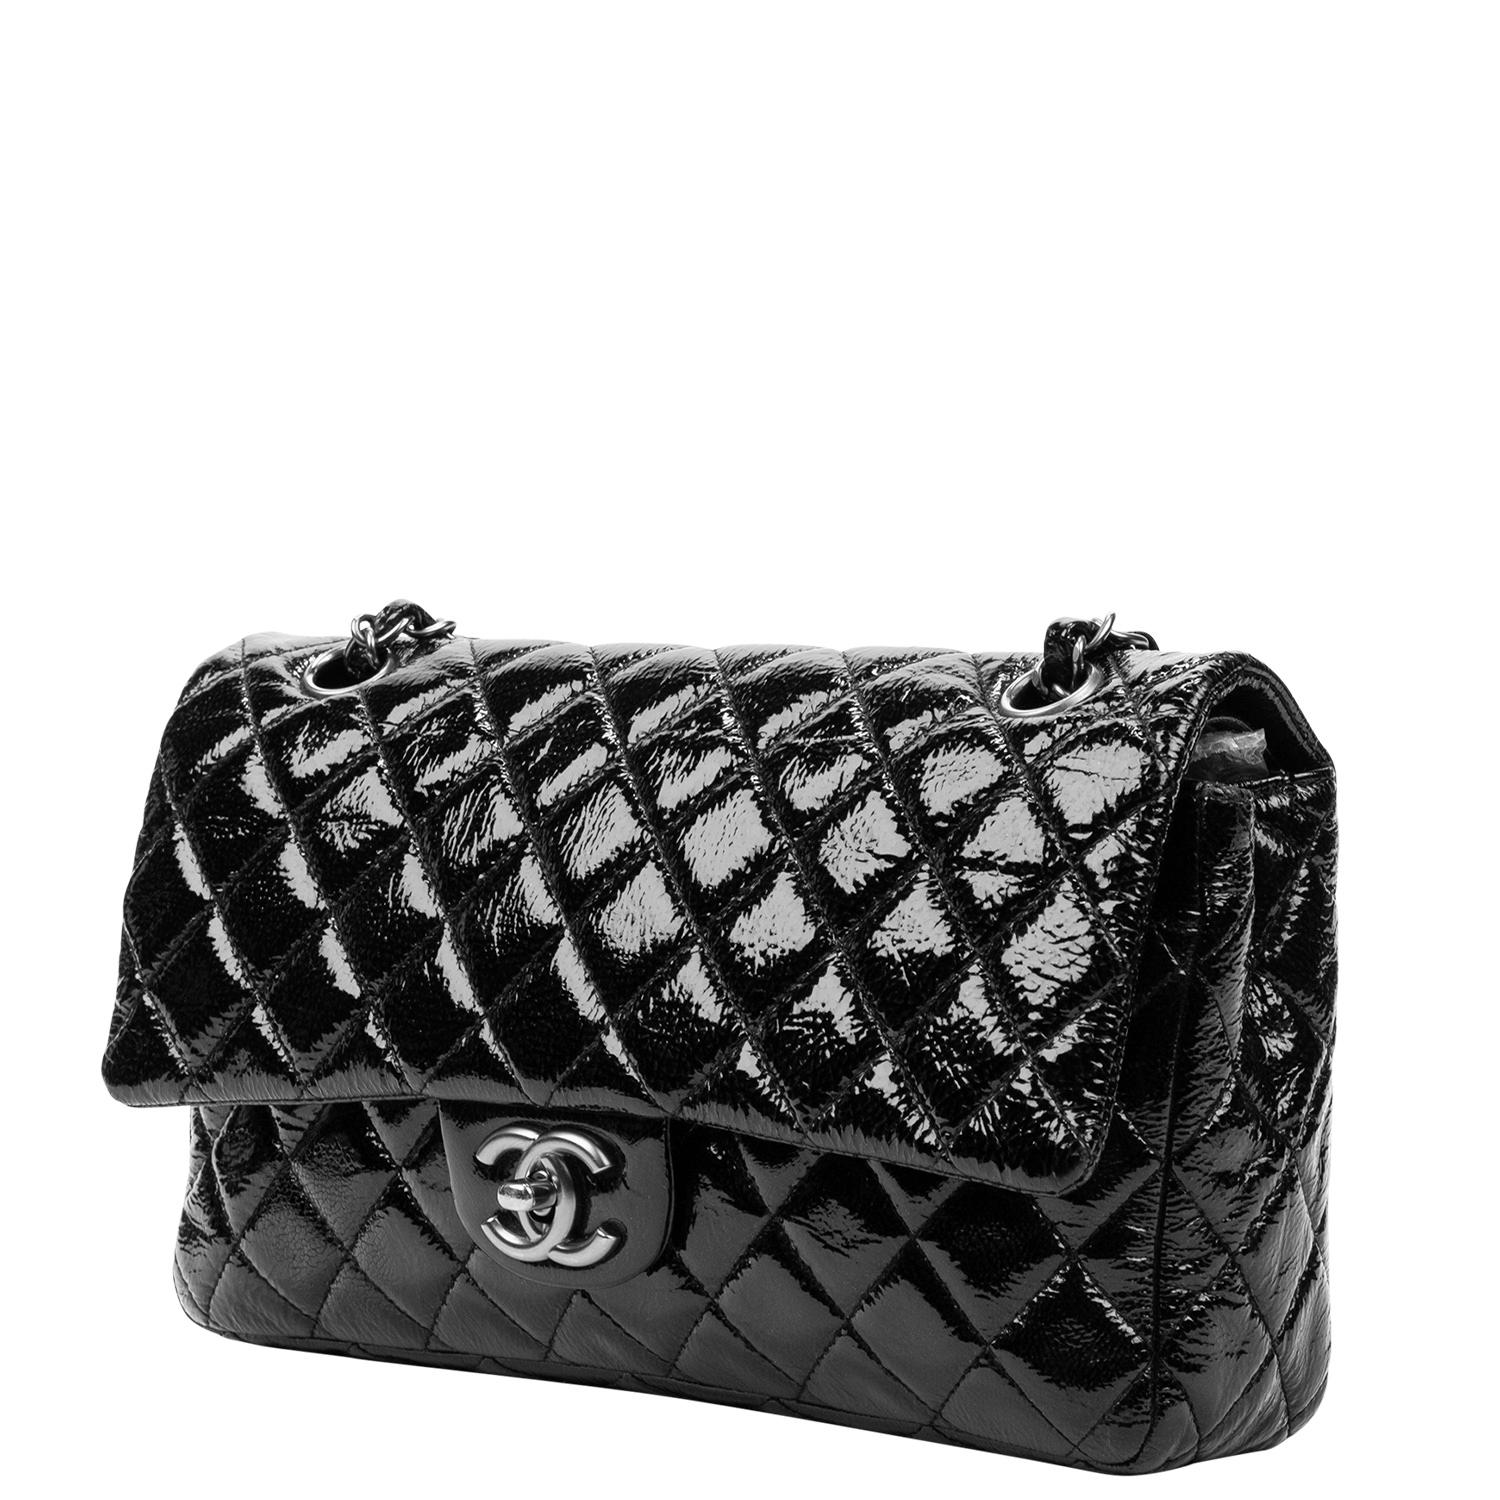 Mid 2000s classic that every collector needs in their collection! This diamond quilted beauty is crafted in a glossy black patent leather, antiqued silver-tone hardware, chain-link leather threaded shoulder strap, and a single exterior pocket. The